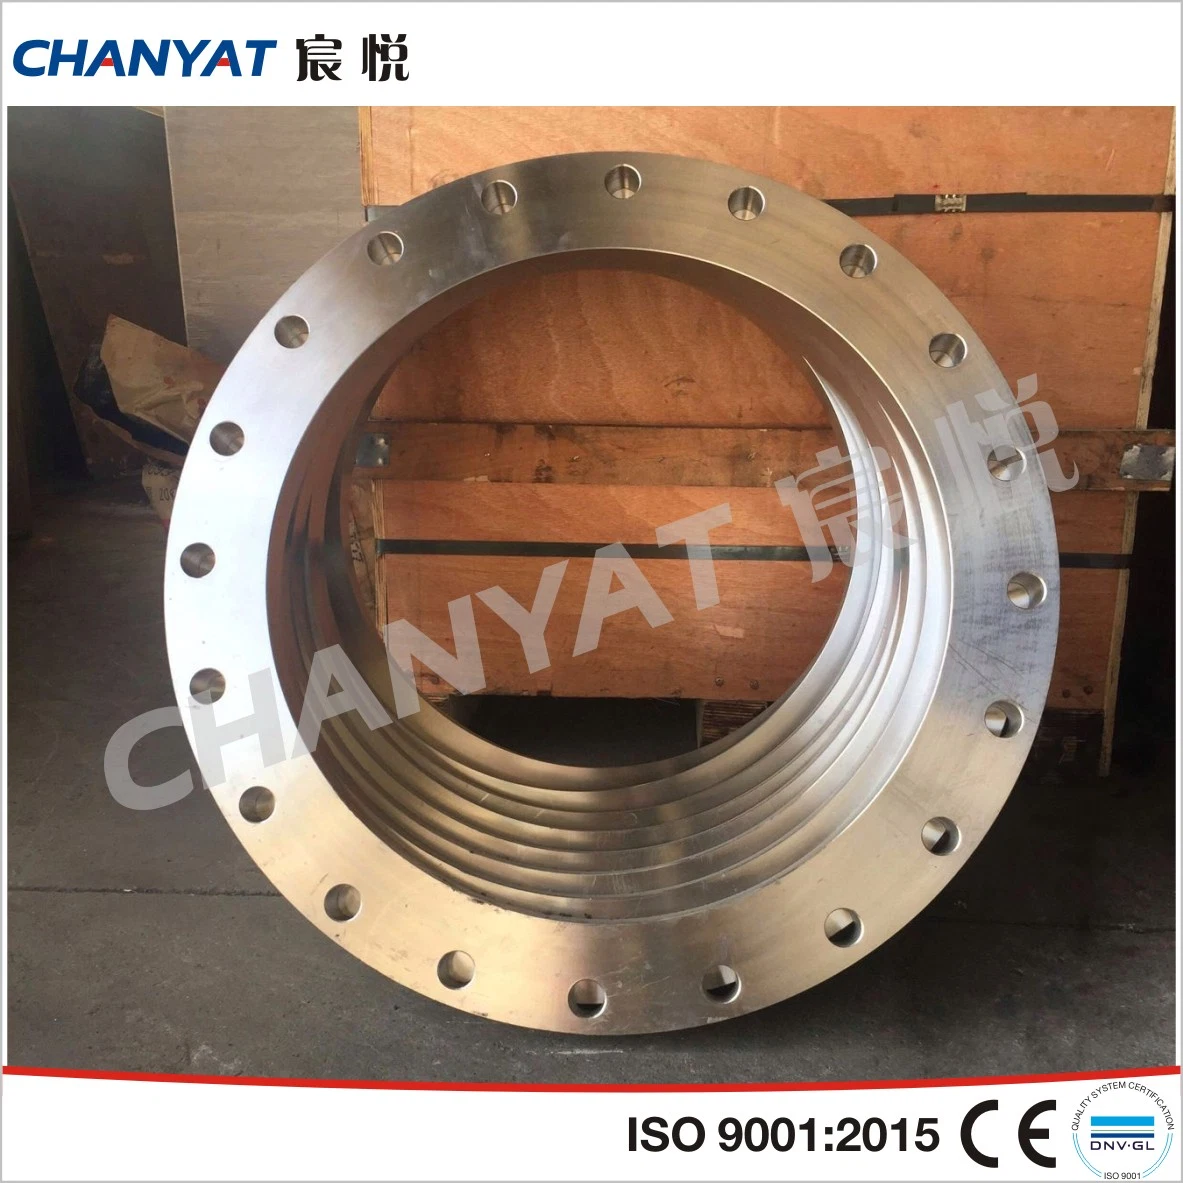 DIN Alloy Steel Lap Joint Flange (1.7335, 13CMo44, 13CrMo4-5)